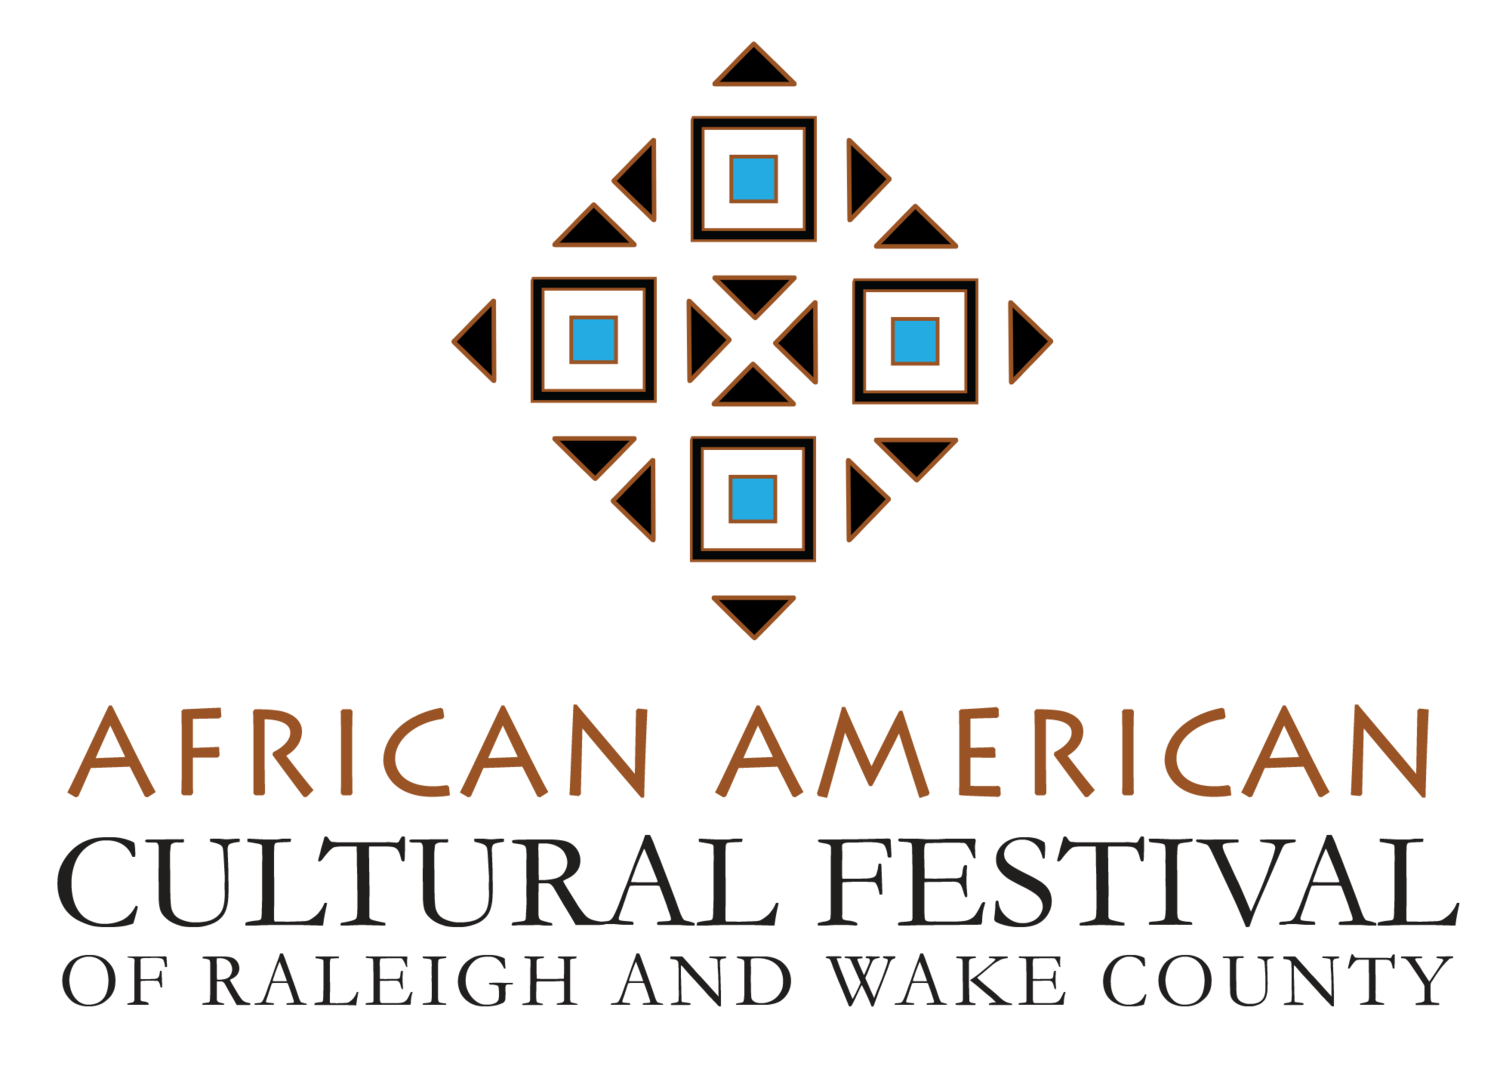 African American Cultural Festival of Raleigh and Wake County, NC The